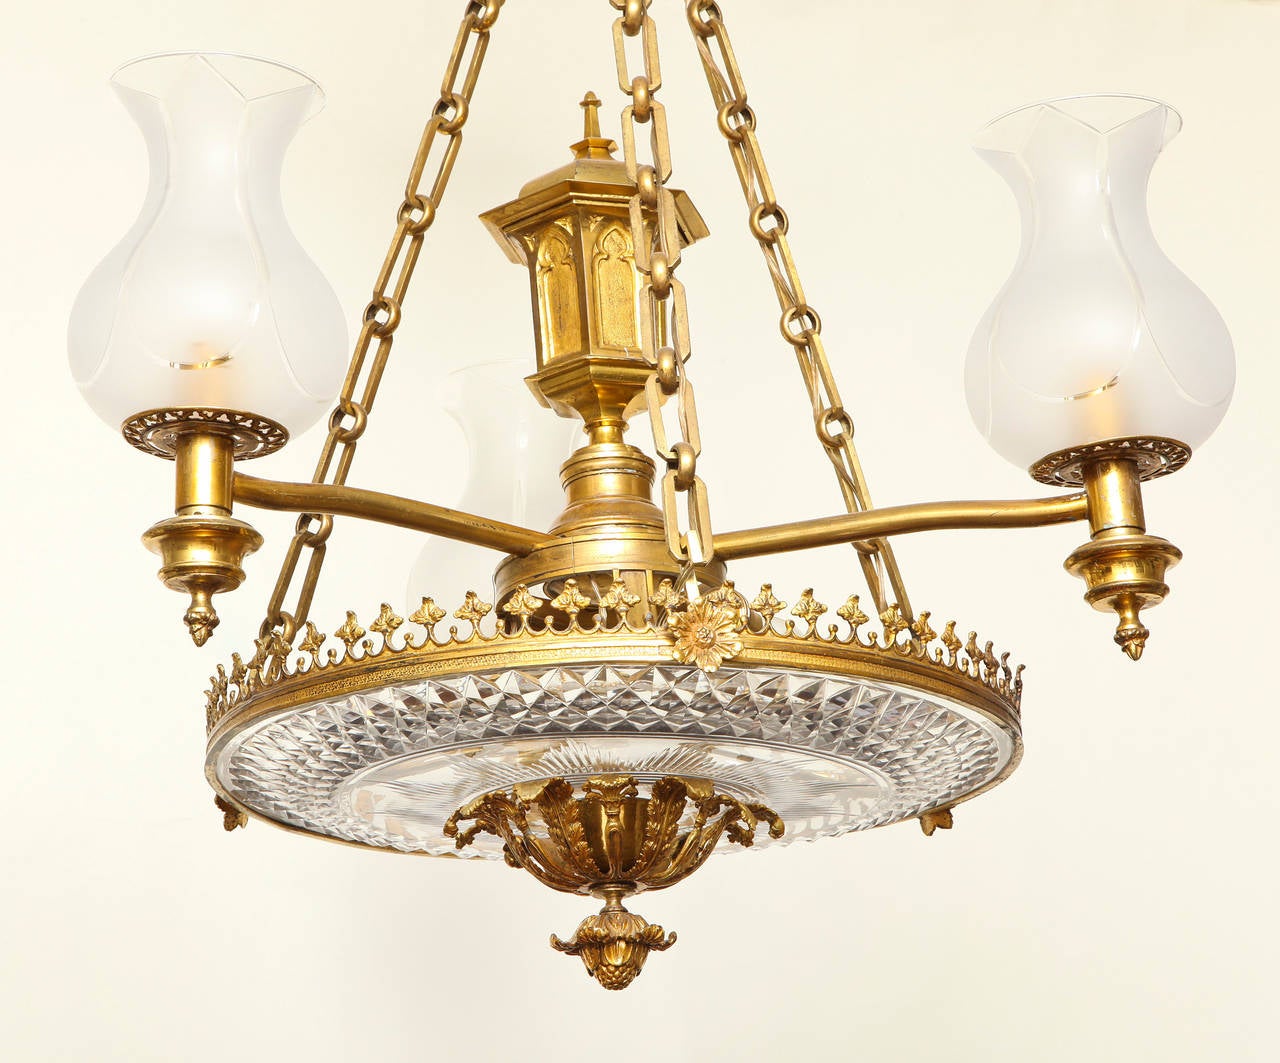 English late Regency colza ceiling fixture. The hexagonal center gilt bronze oil vessel with Gothic arches issuing three arms secured to gilt bronze ring with trefoil gallery securing heavy cut crystal dish illuminated by means of three candelabrum